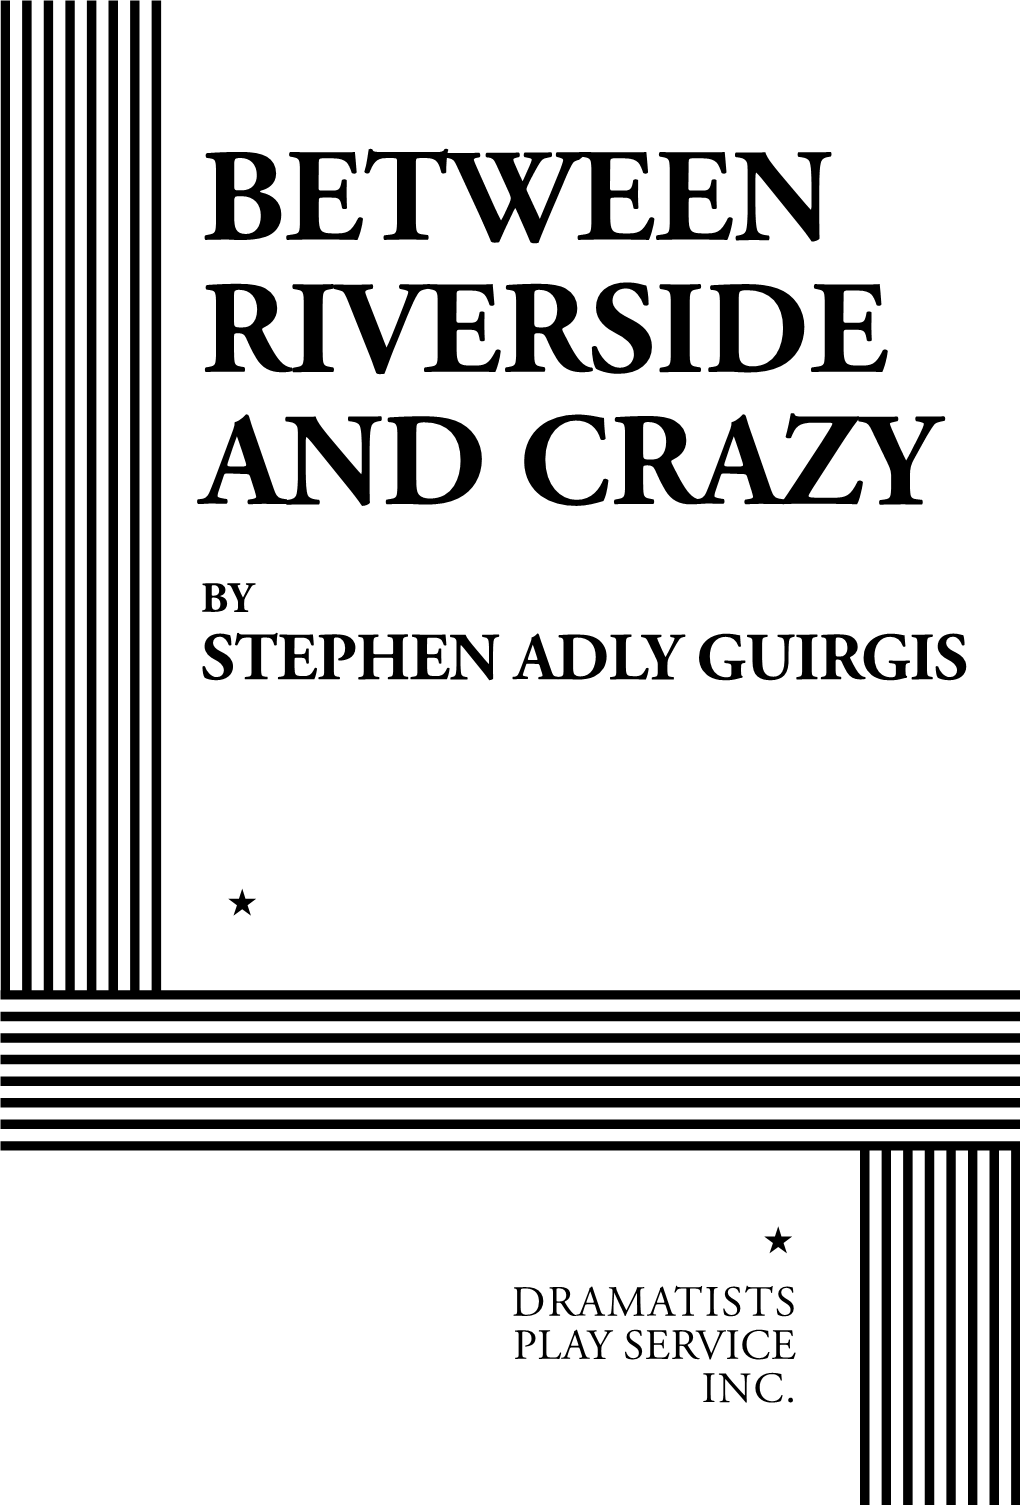 Between Riverside and Crazy by Stephen Adly Guirgis